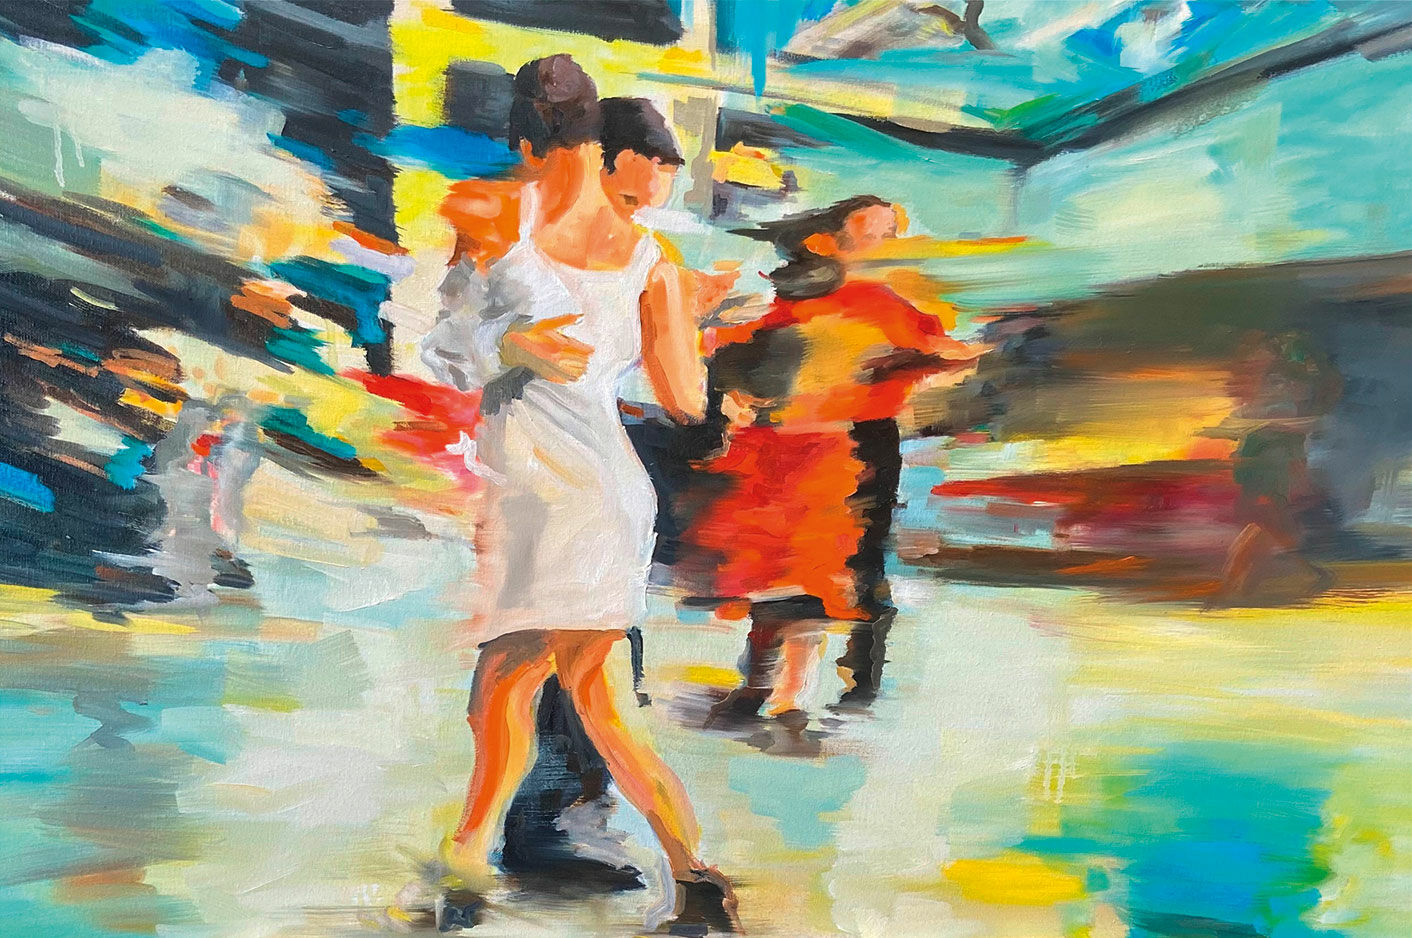 Picture "Tango" (2019) (Original / Unique piece), on stretcher frame by Anke Gruss